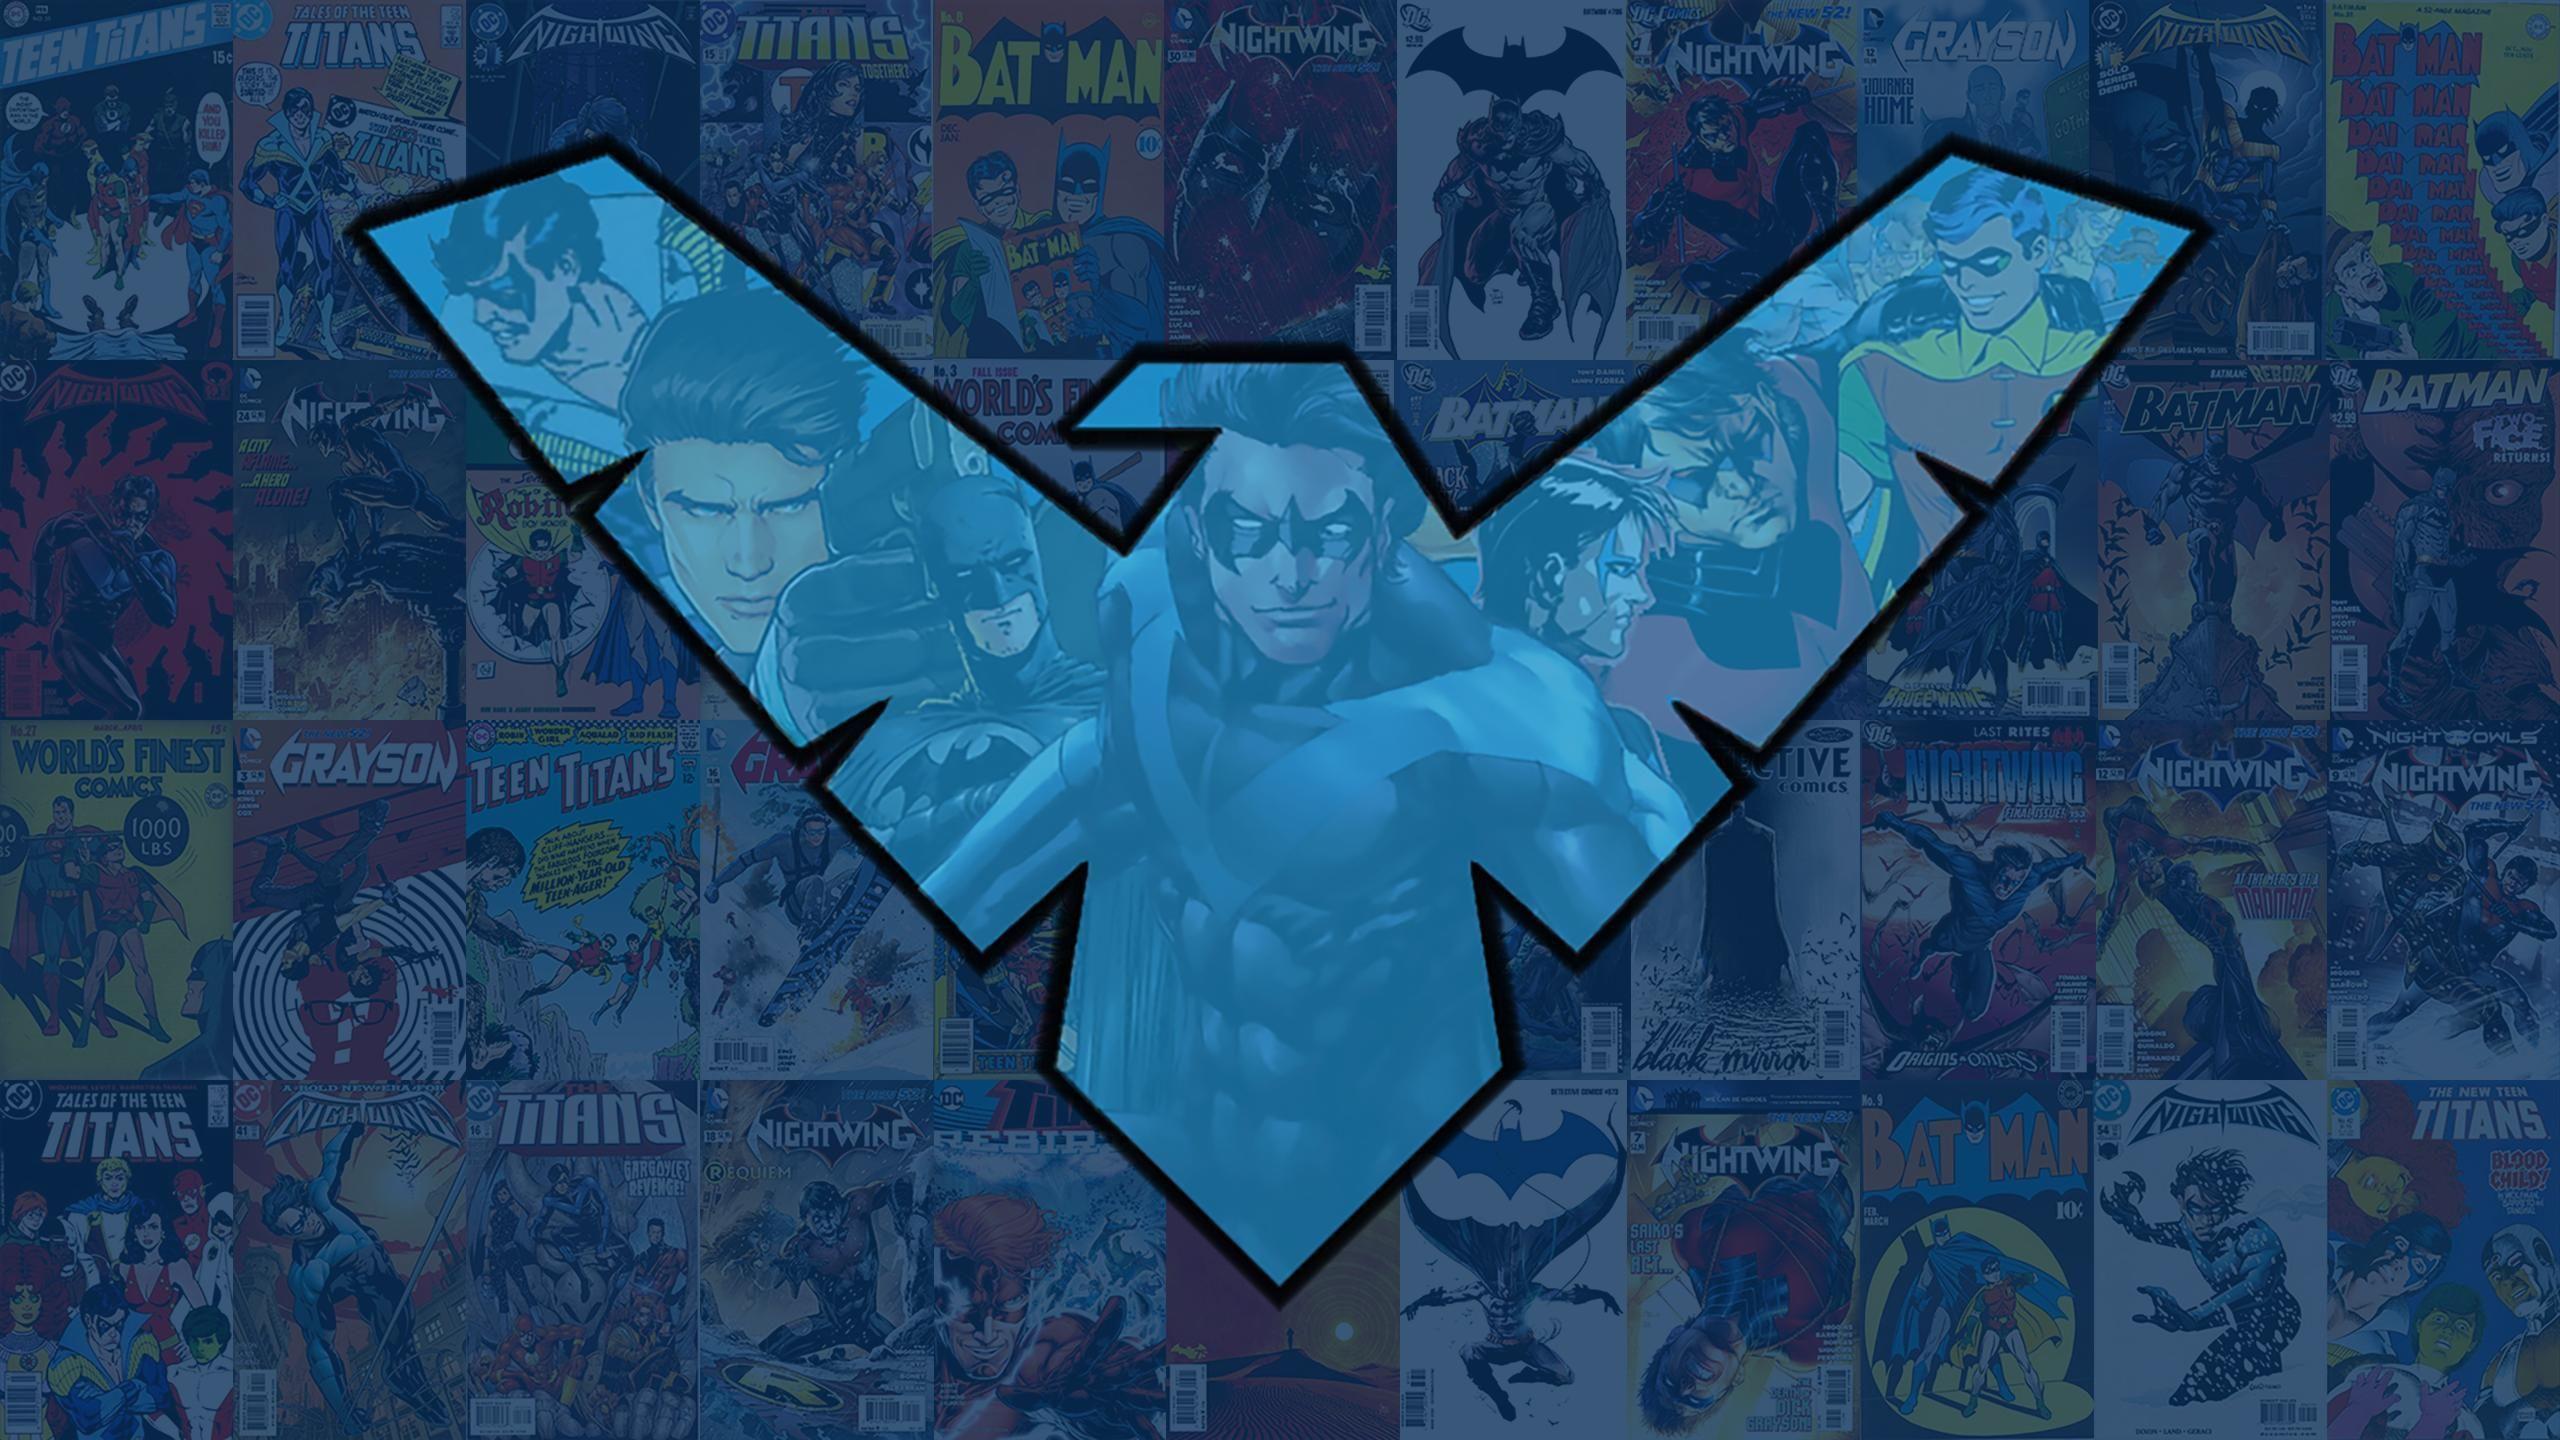 Batman Nightwing Android Central. HD Wallpaper. HD